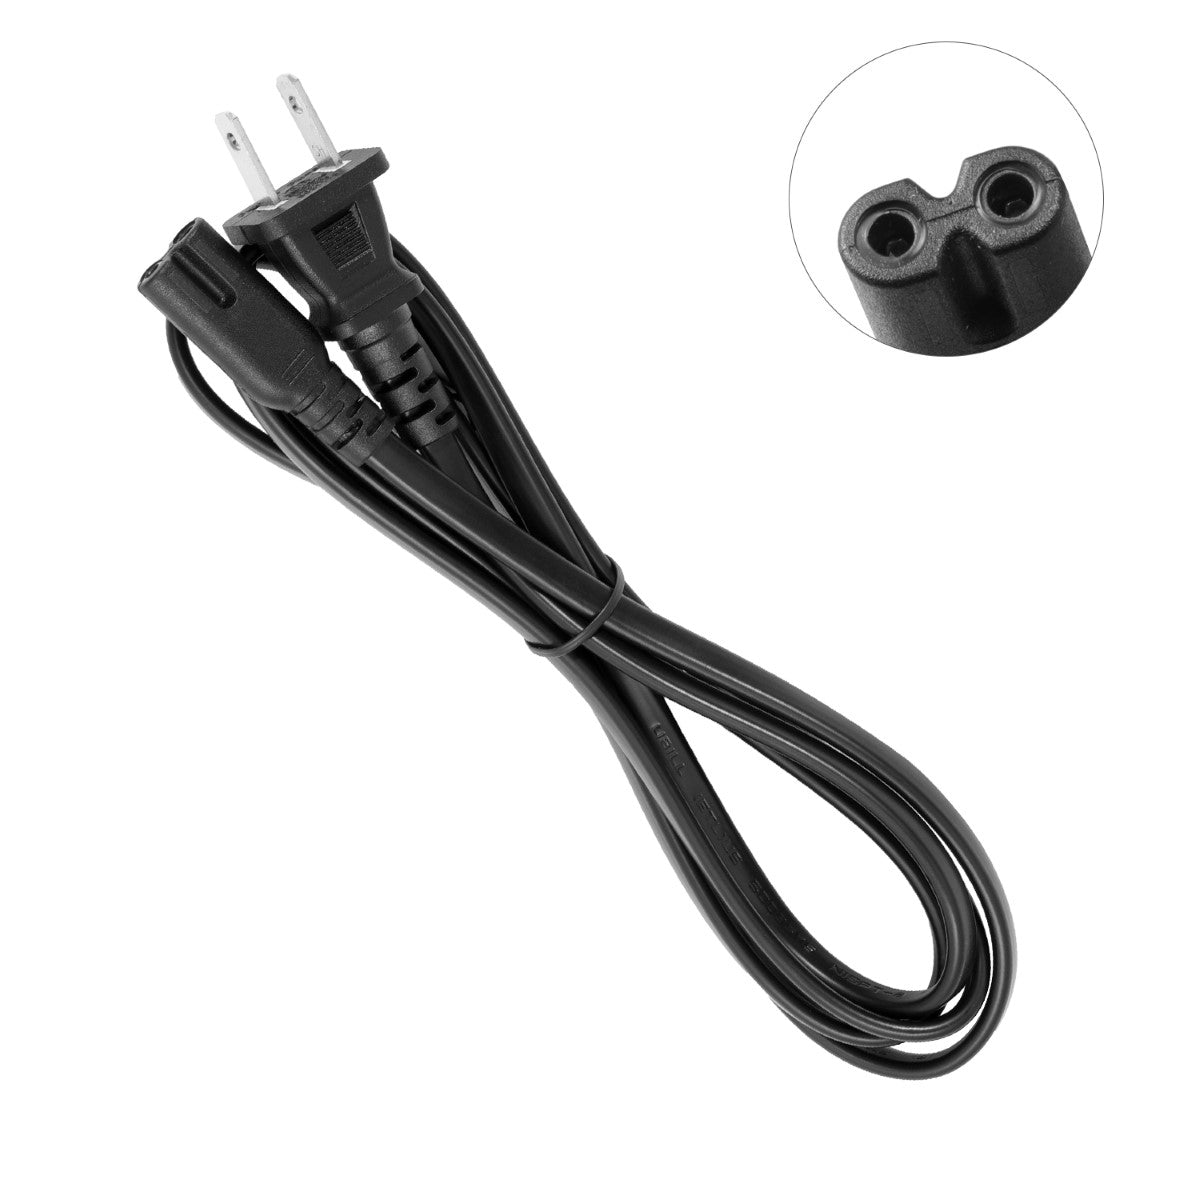 Power Cord for HP ENVY 100 e-All-in-One Printer.